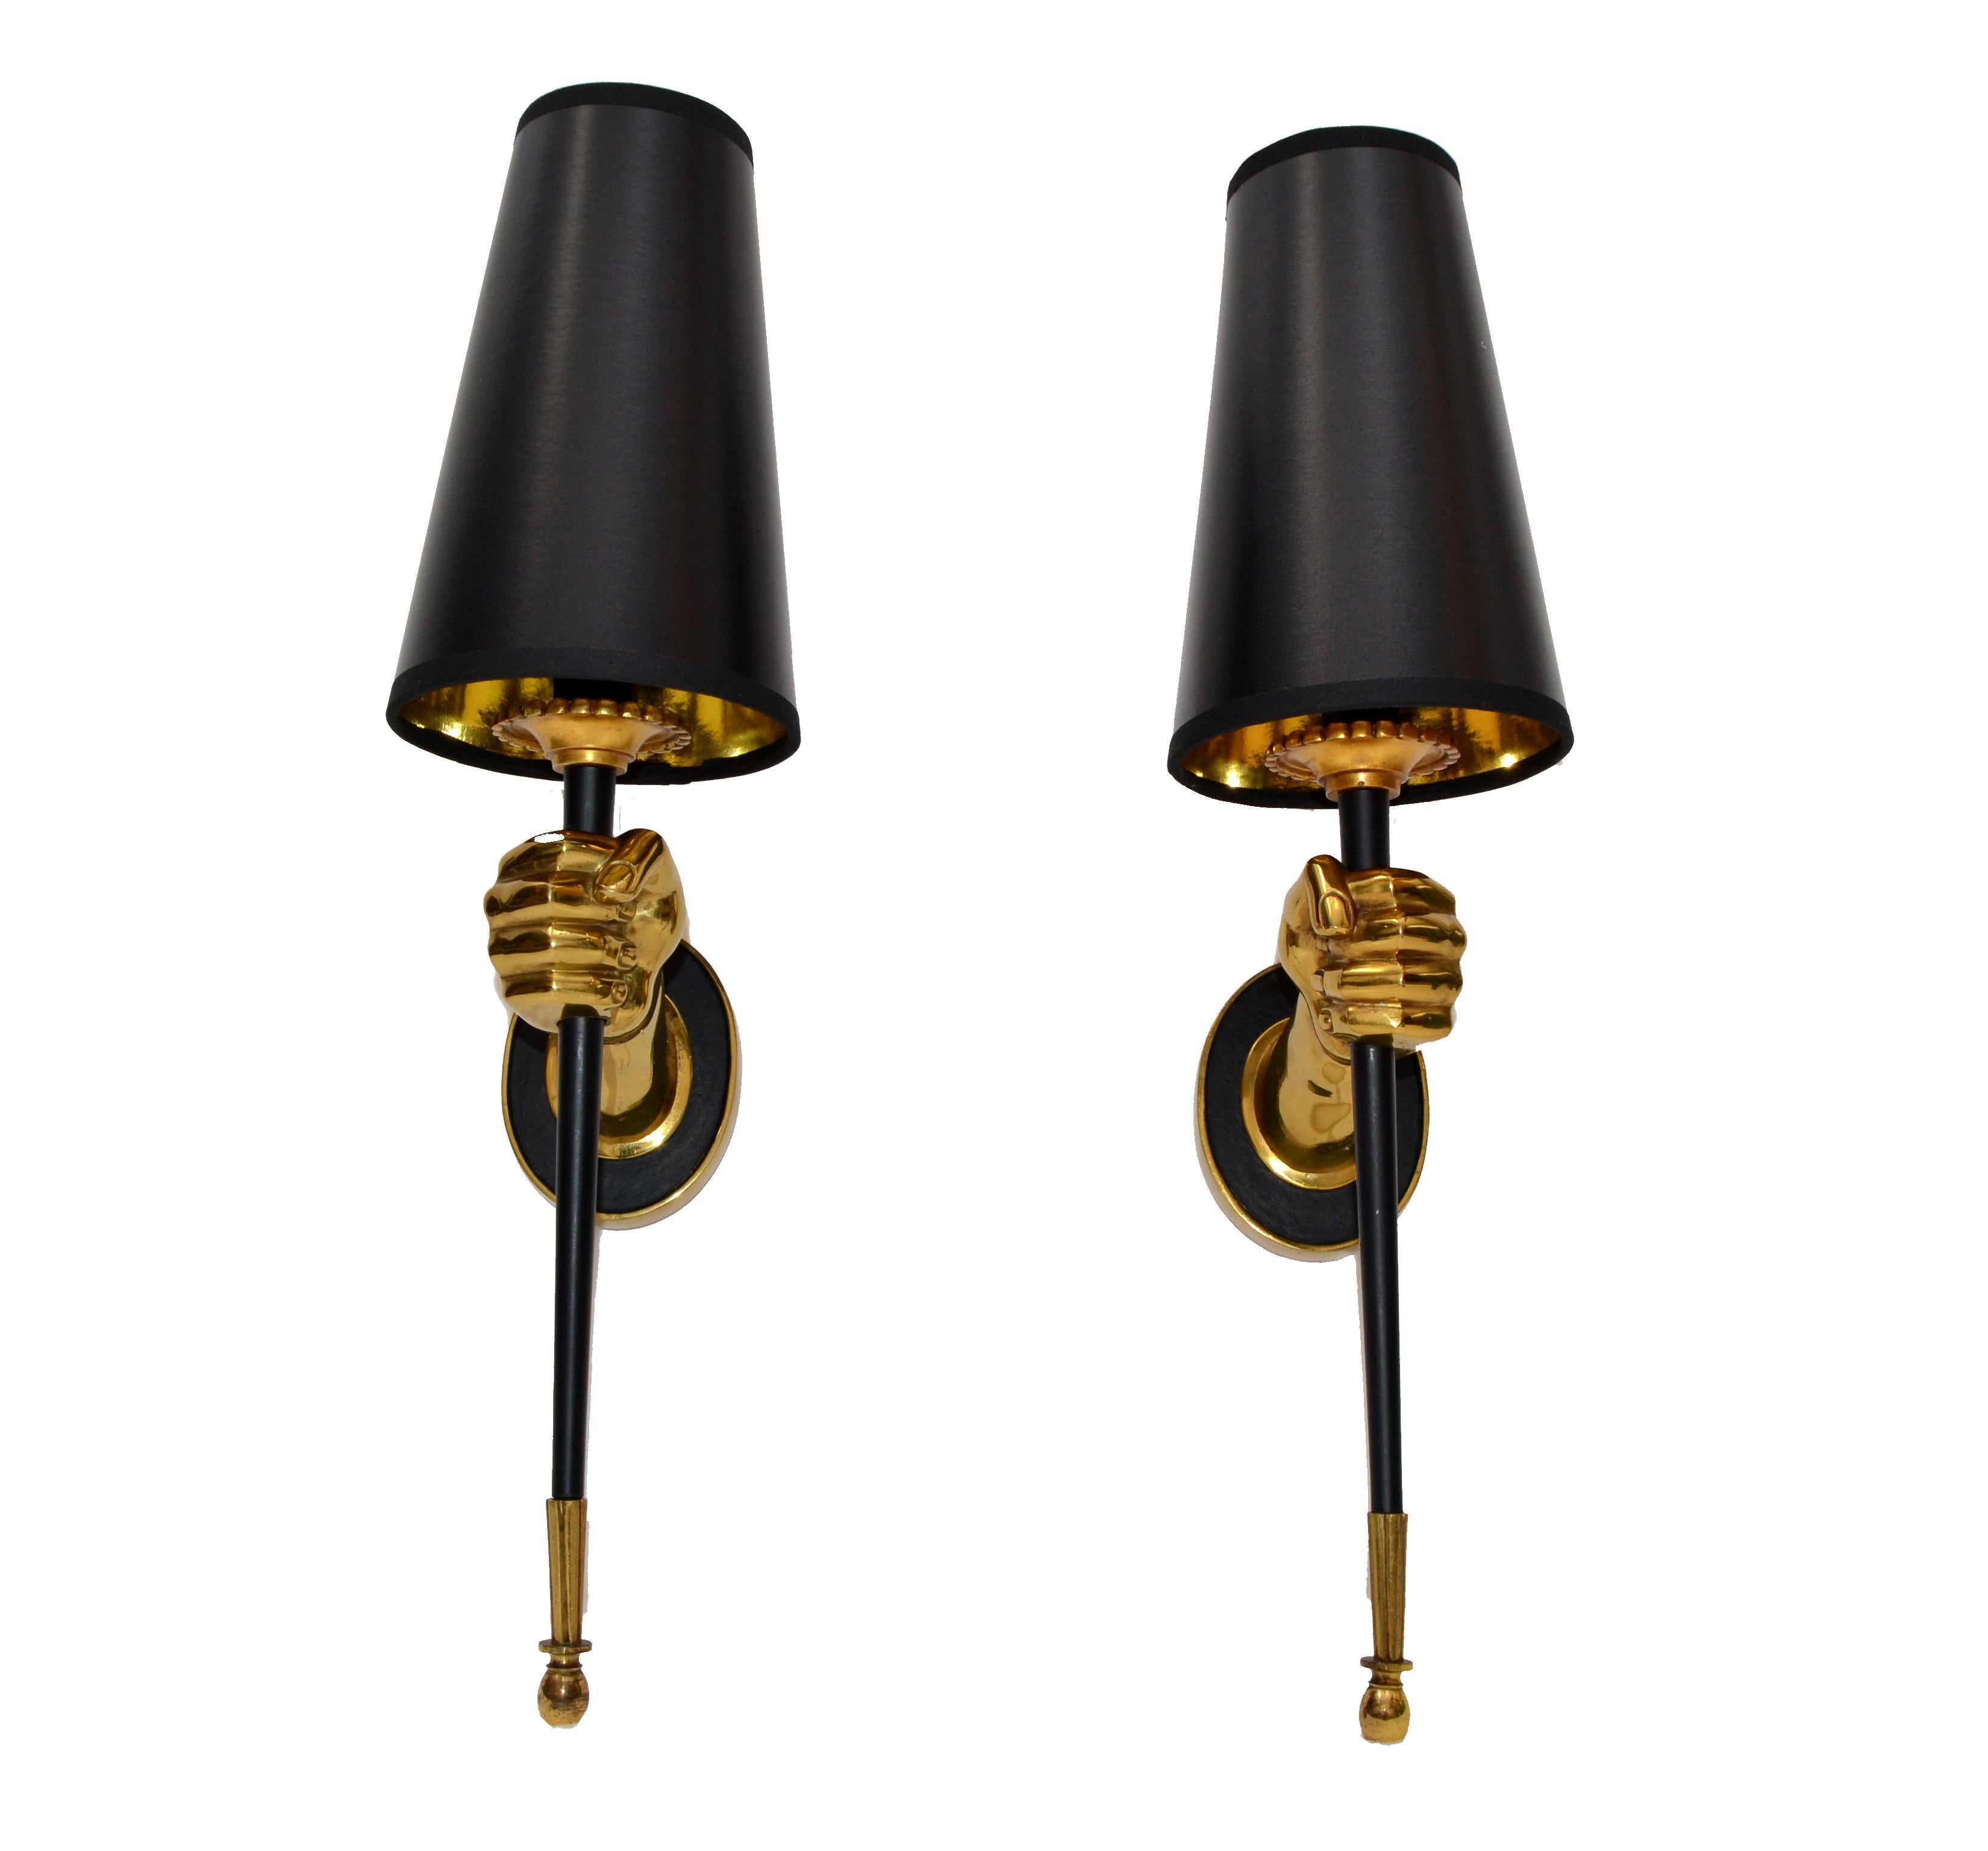 Impressive pair of sconces by Maison Jansen figuring a bronze hand holding a black lacquered torch.
One light, 60 watts max. US rewired.
Dimension without shade: 13 inches height, 3 1/4 inches width, 6 inches depth.
Projection backplate 4.5 H, 3